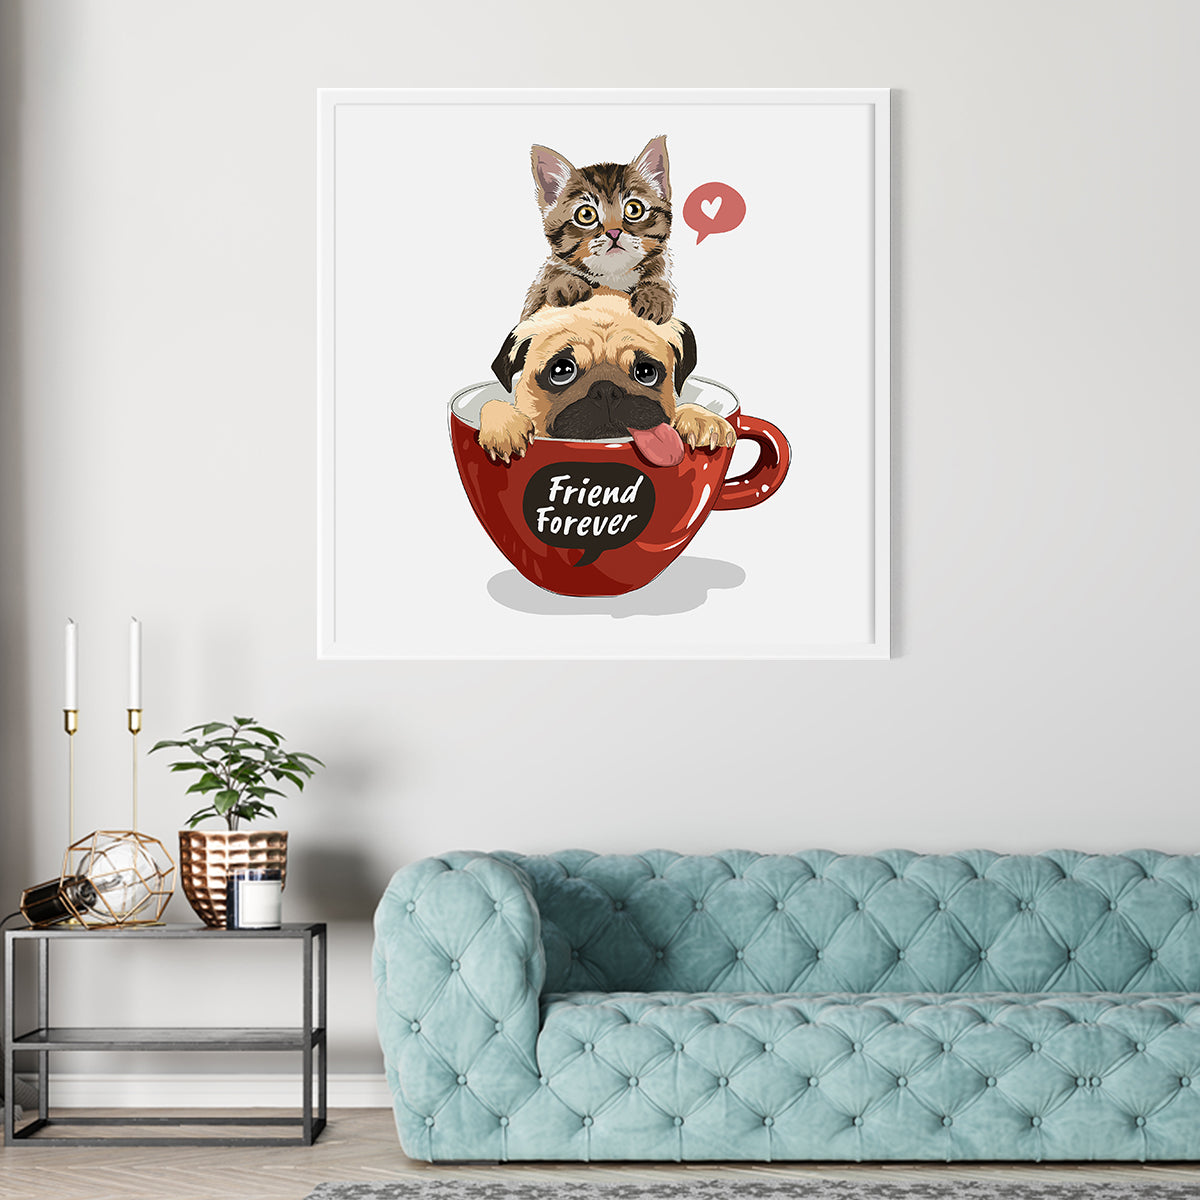 Dog with Kitten in Red Coffee Cup Posters For Wall Decor-Square Posters NOT FRAMED-CetArt-8″x8″ inches-CetArt